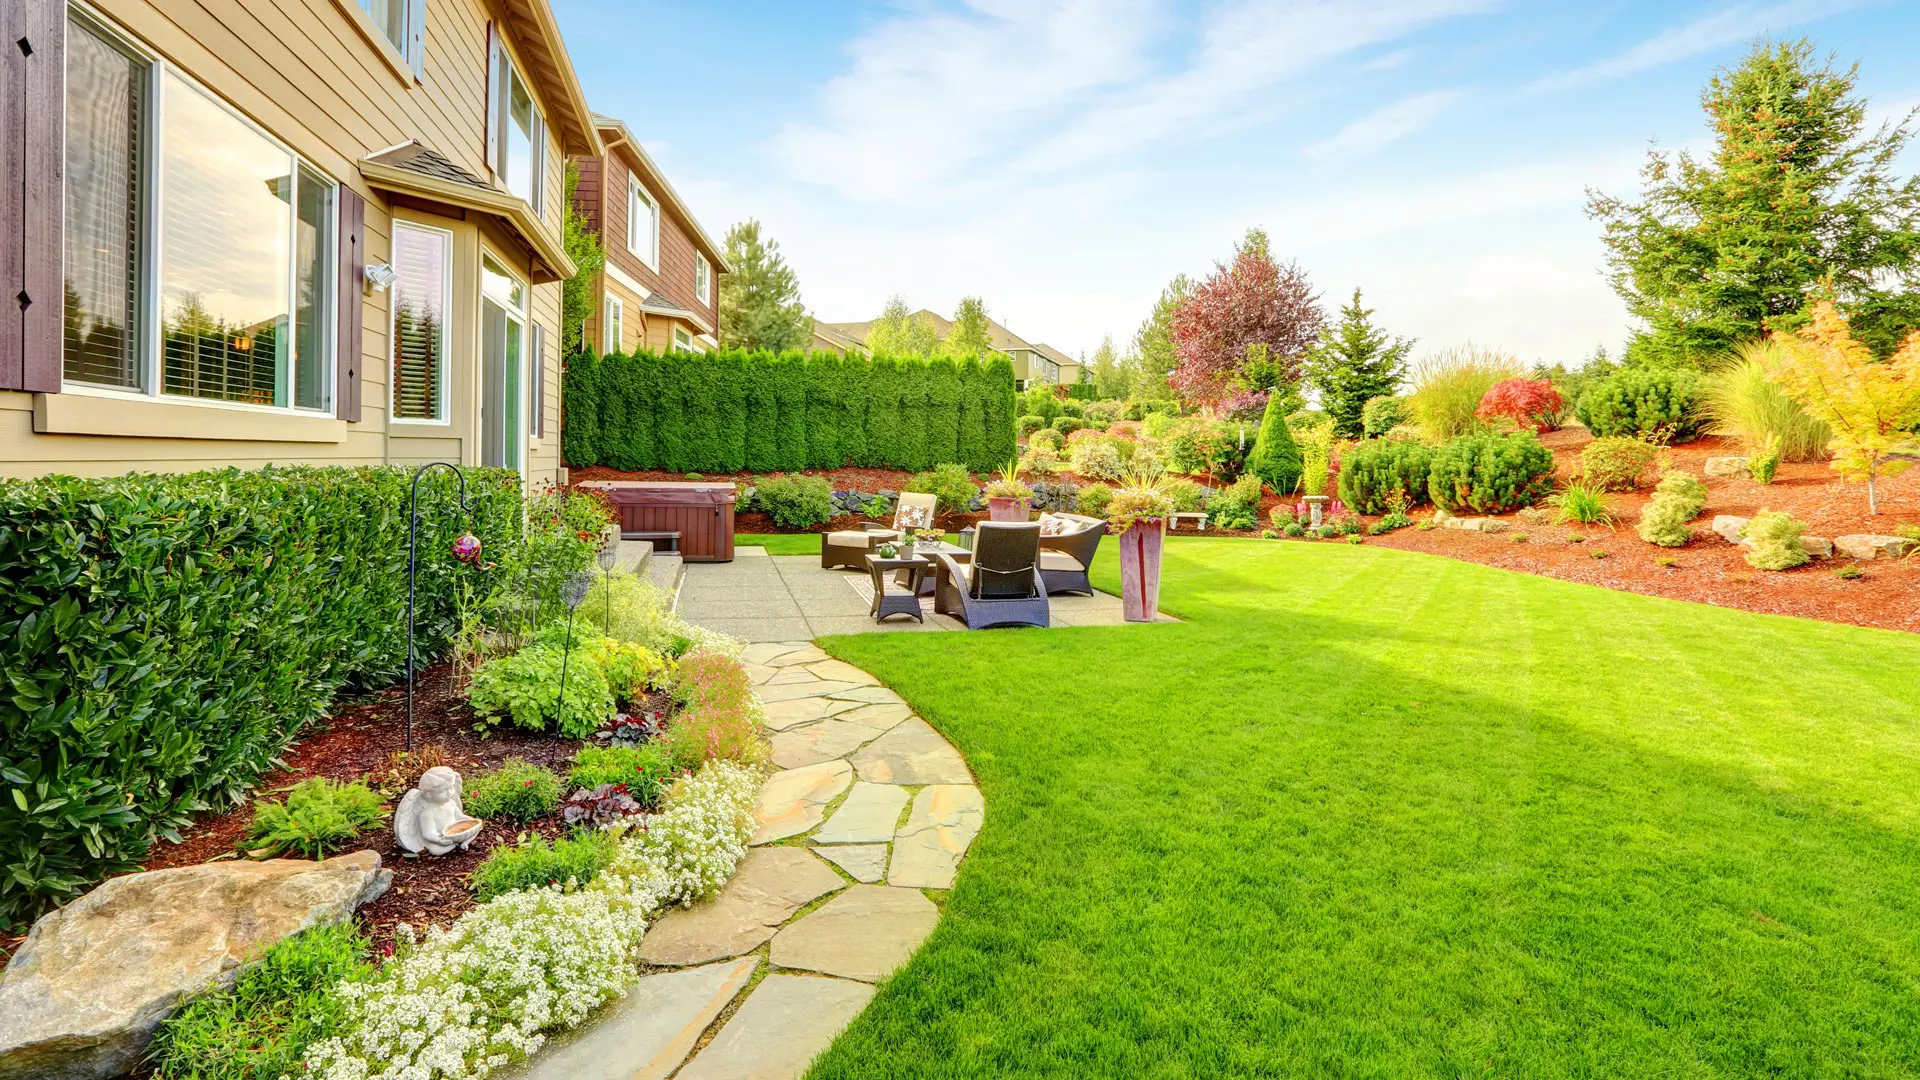 a nicely landscaped lawn